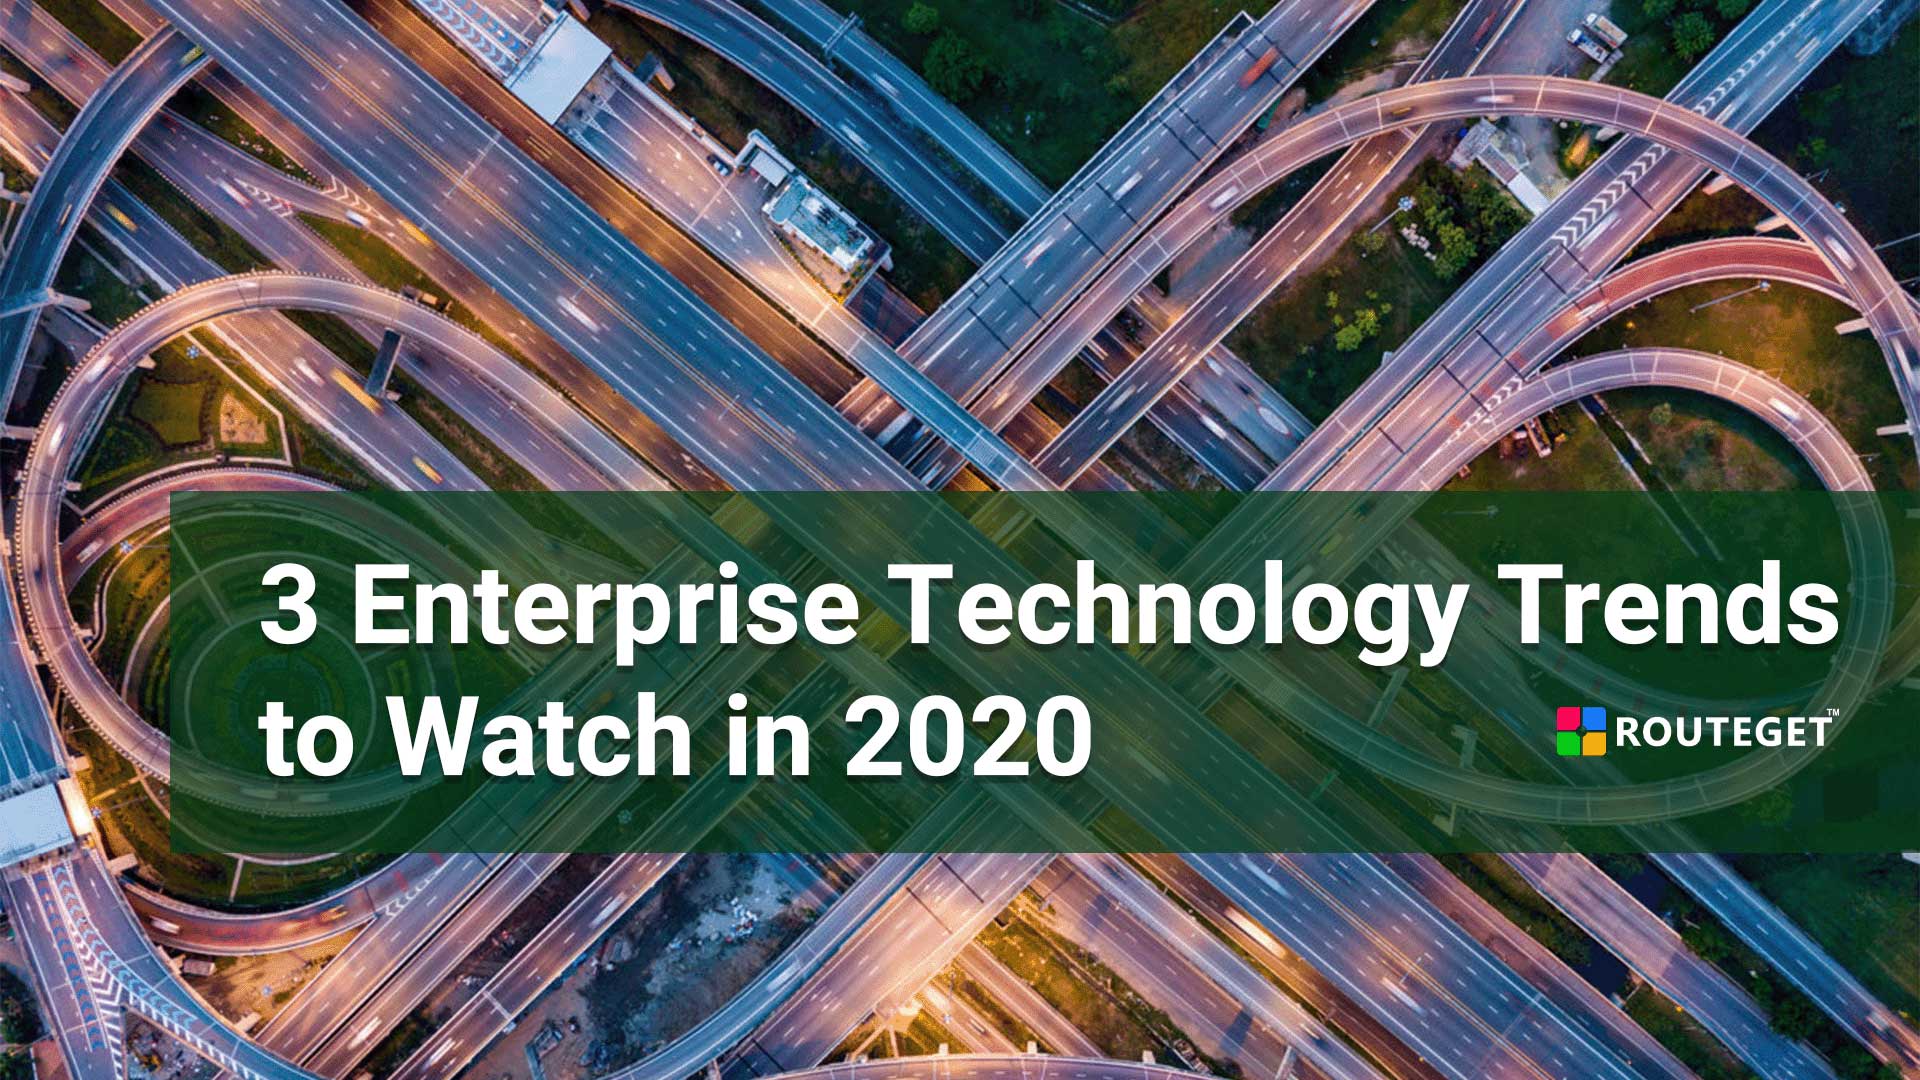 3 Enterprise Technology Trends to Watch in 2020